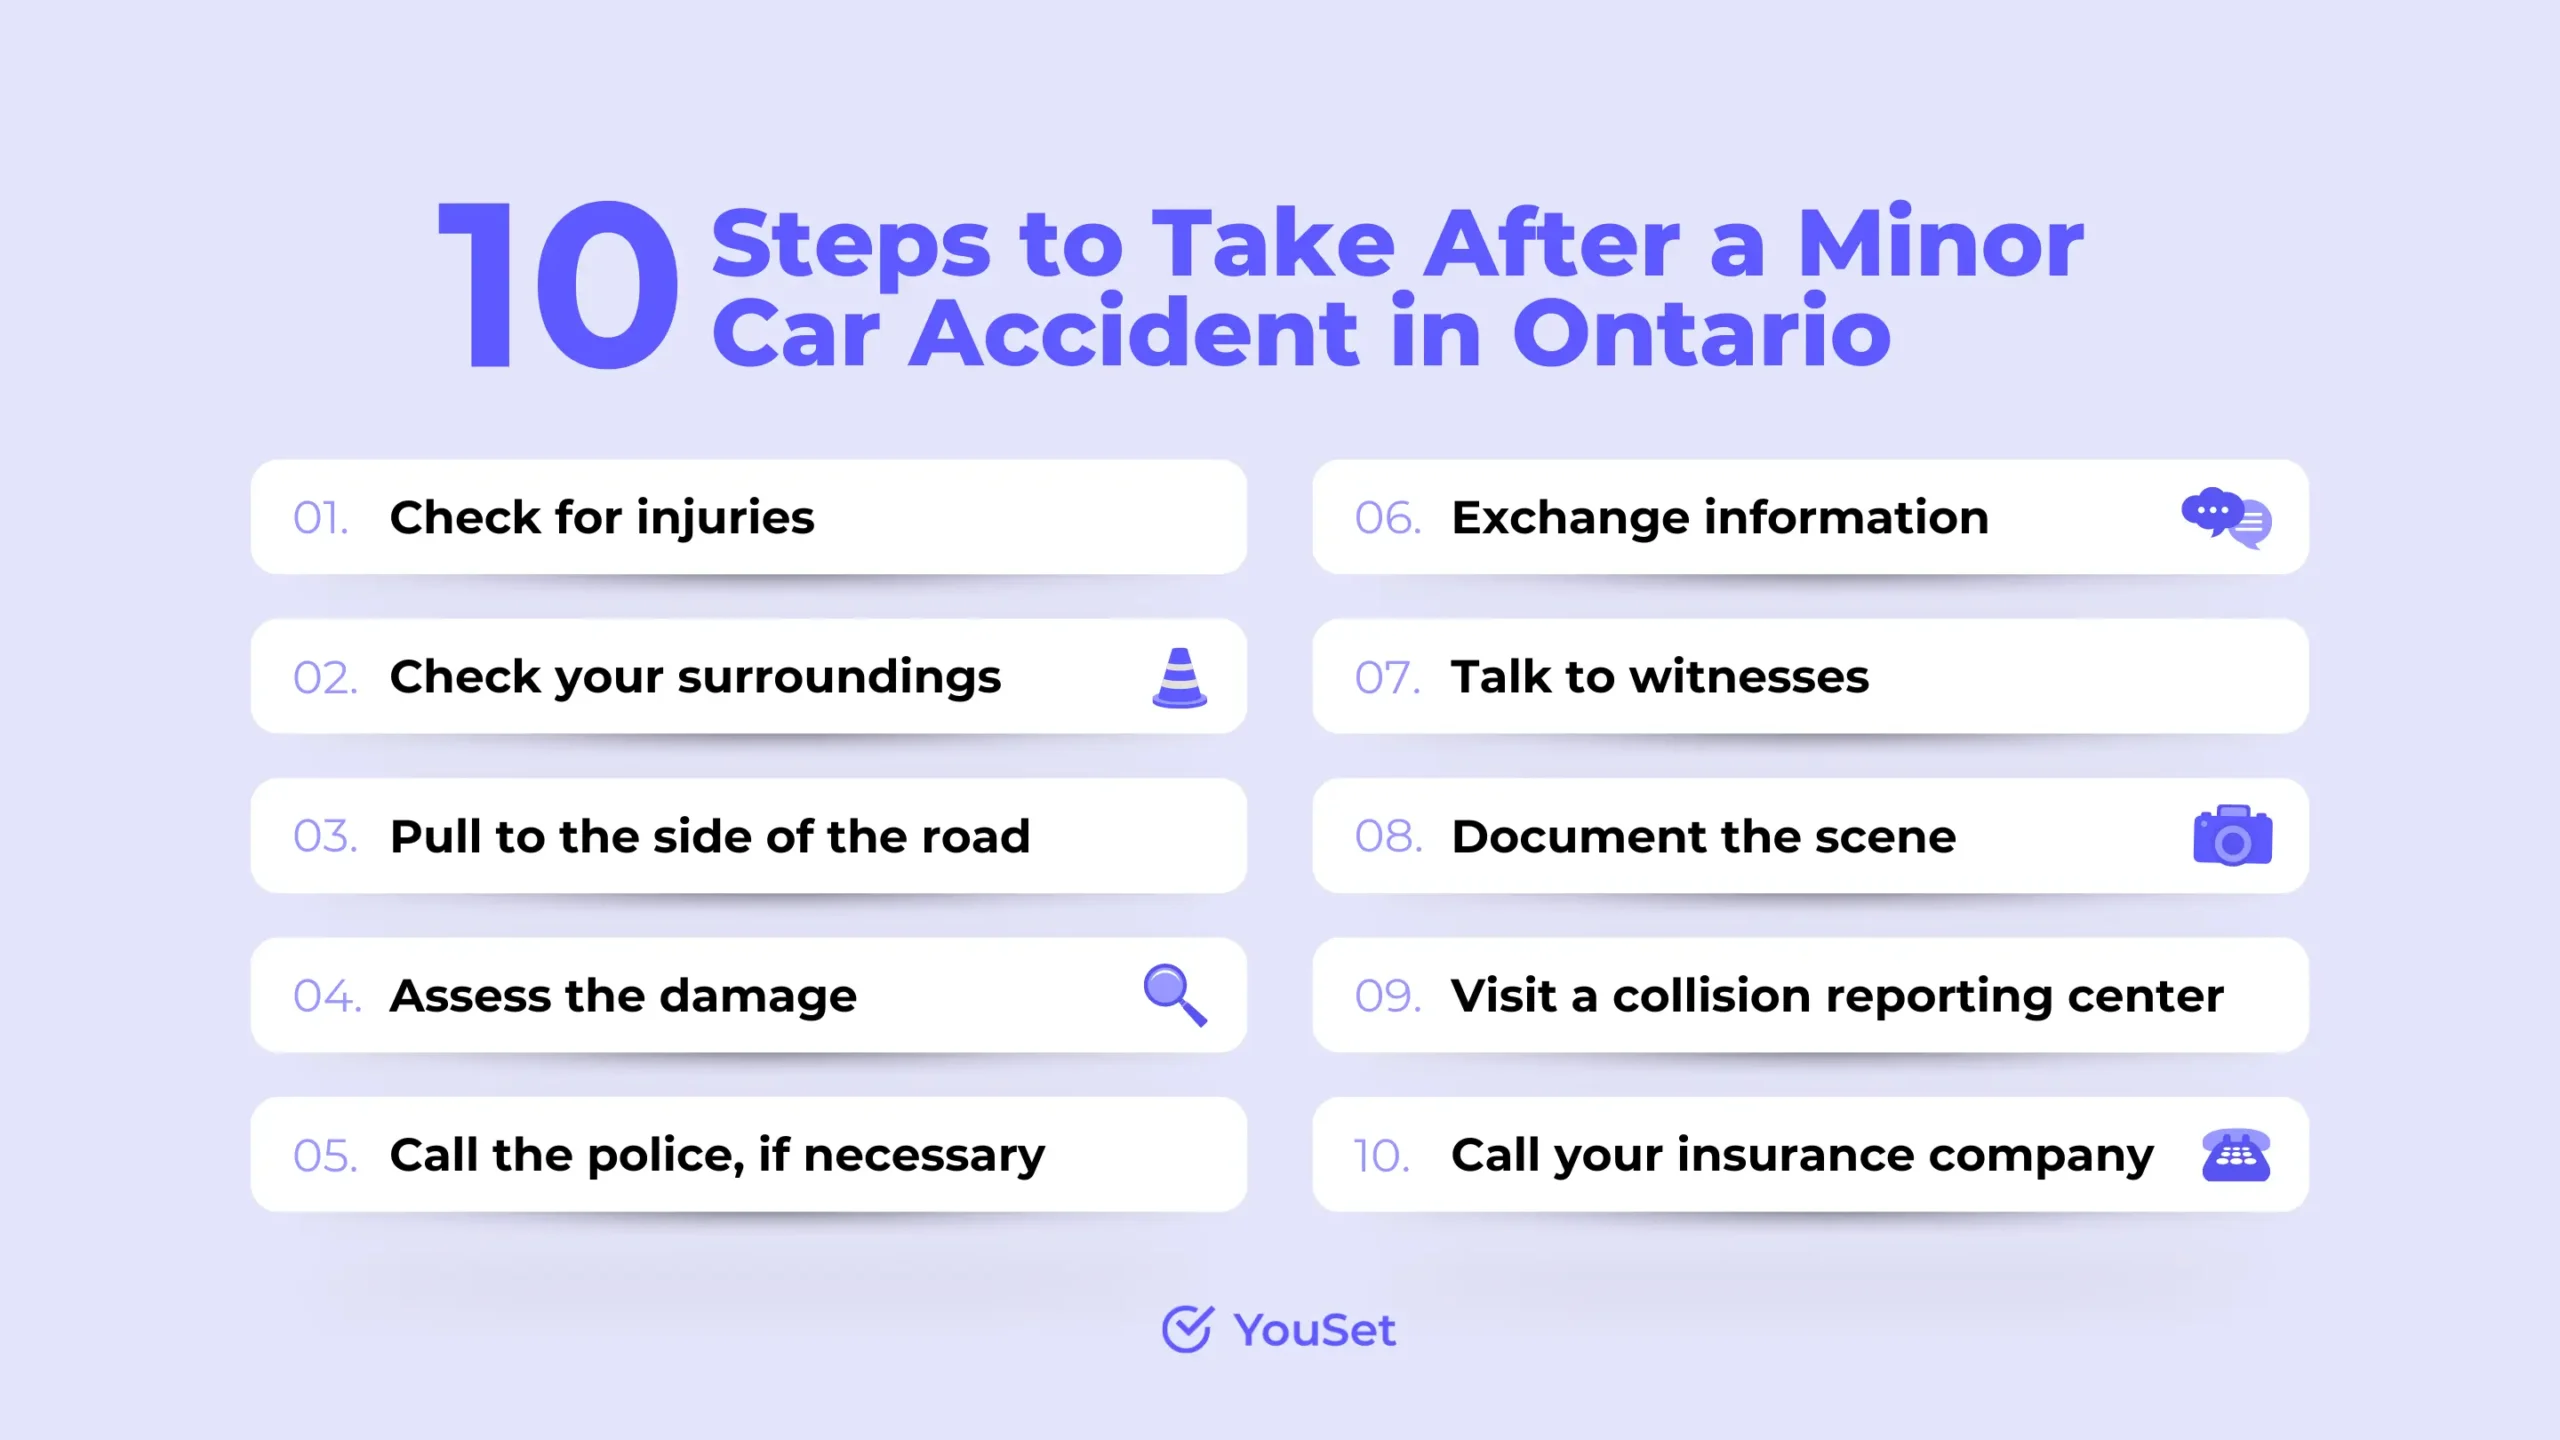 10 Steps to Take After a Minor Car Accident in Ontario - YouSet